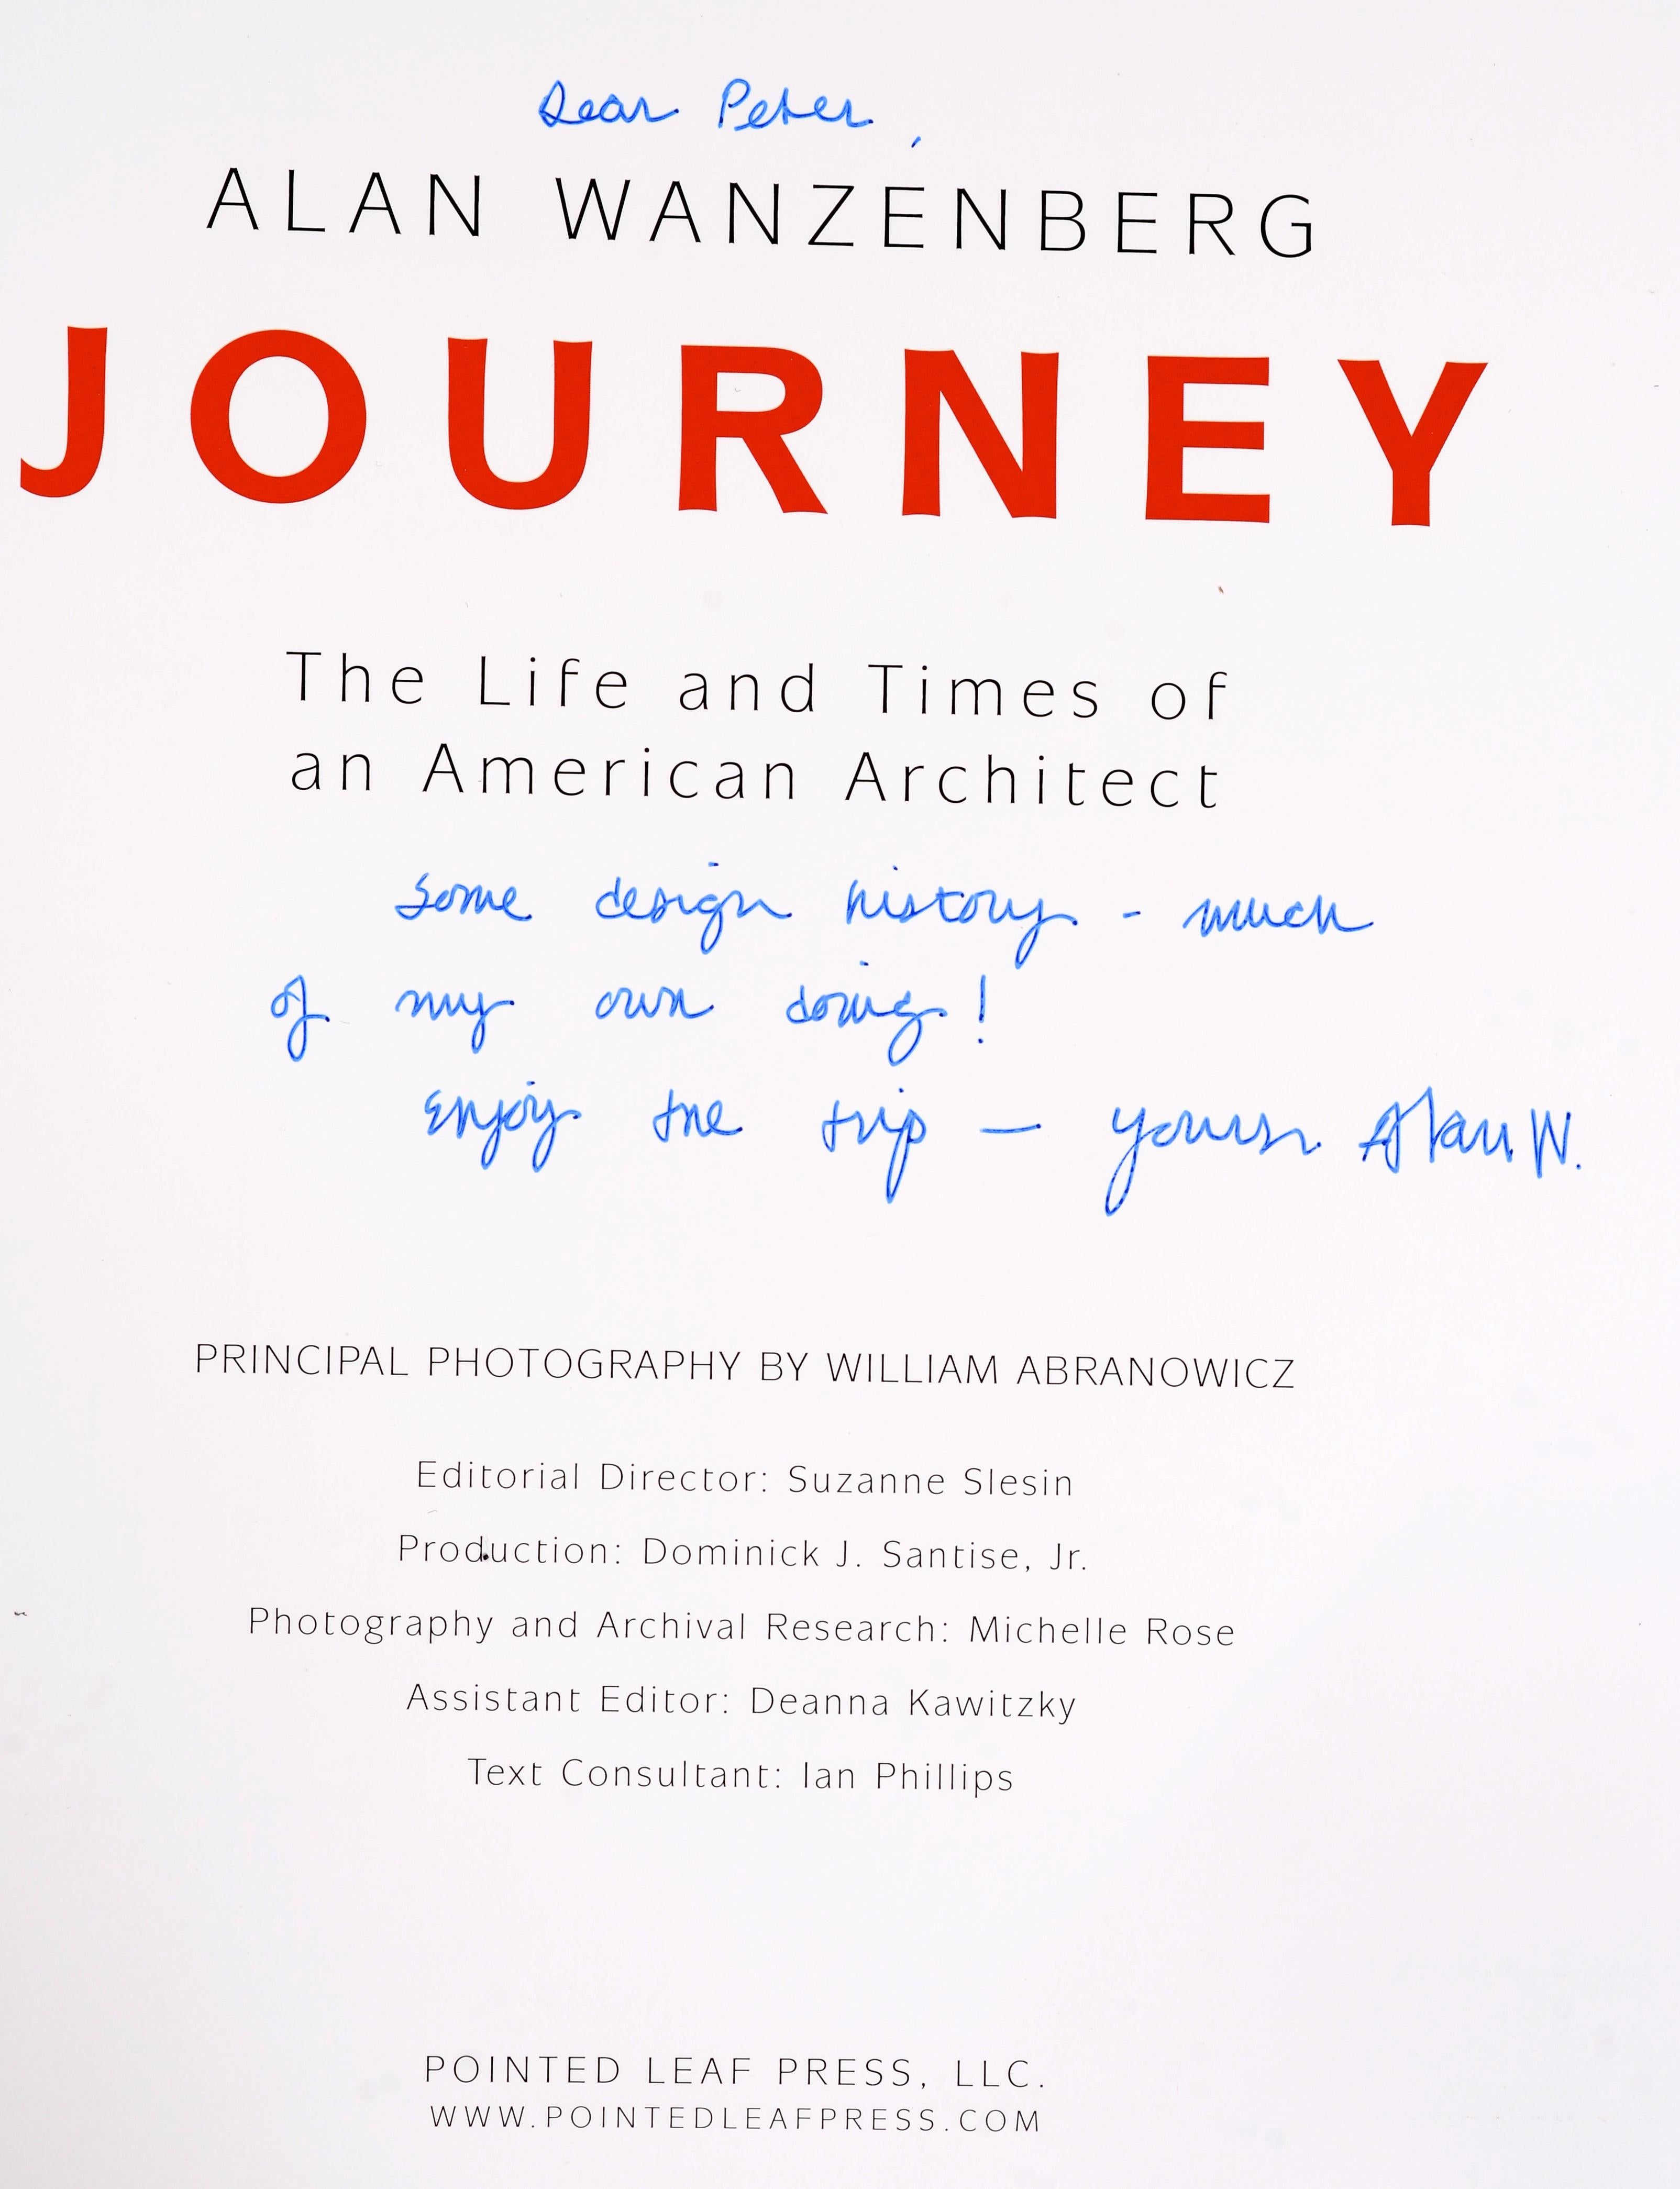 Journey: The Life and Times of an American Architect by Alan Wanzenberg, Signed and inscribed Stated Pointed Leaf Press 2013. 1st Ed hardcover no dust jacket as published. With a preface by prominent philanthropist, art collector, curator, and